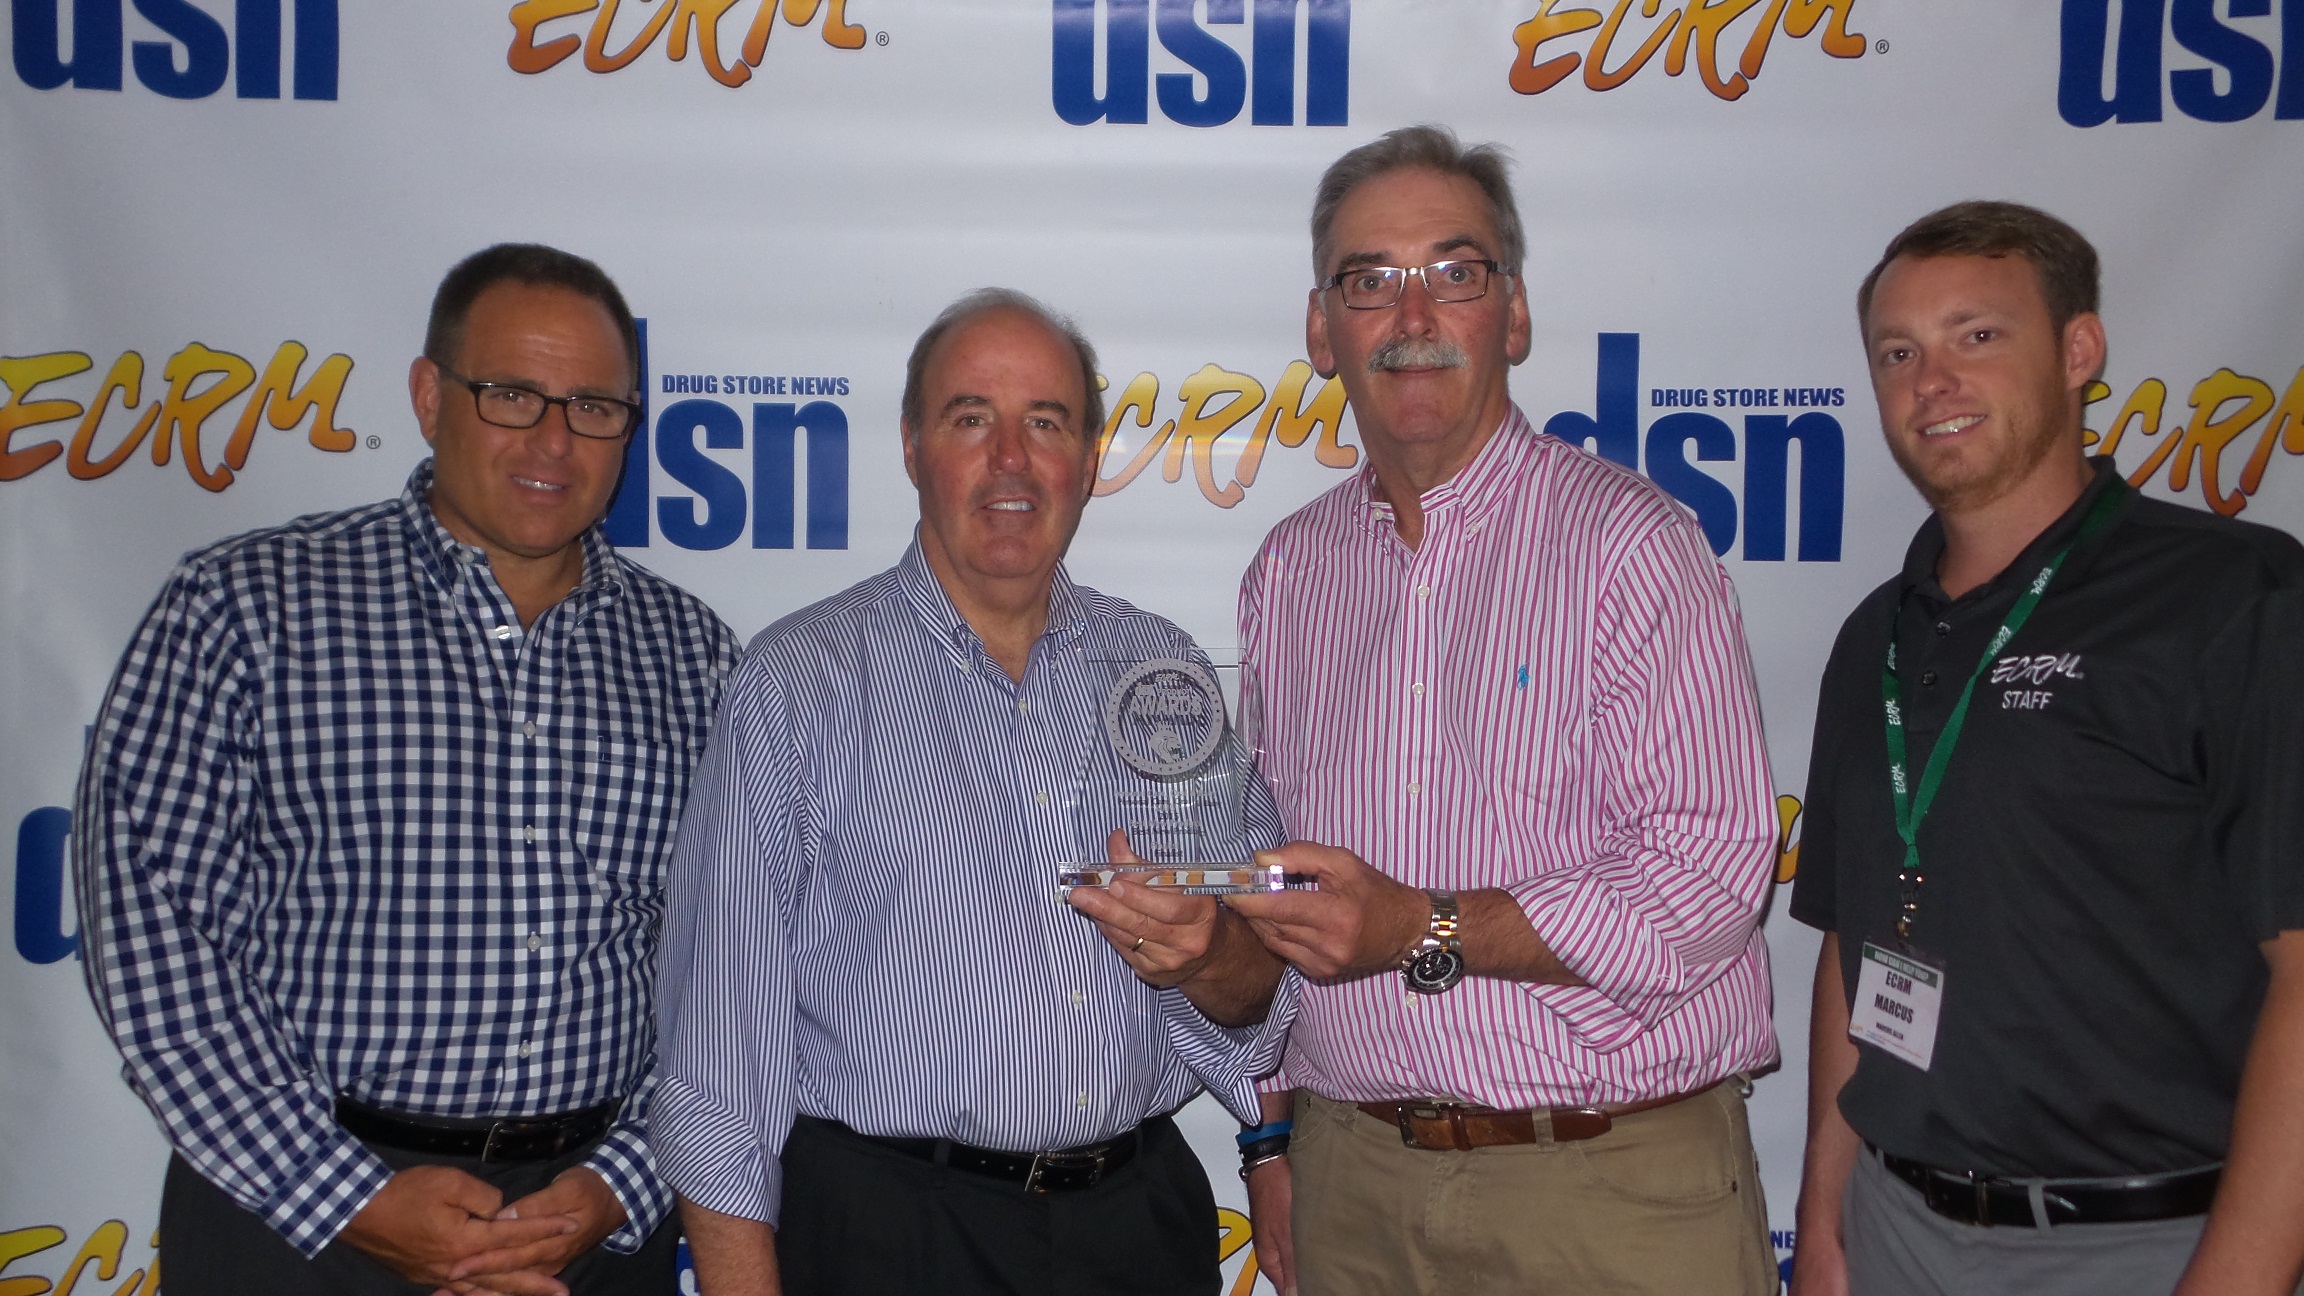 From left: Wayne Bennett, Publisher, Drug Store News; Mark Smith, Vice President of Sales, Dr. Brown’s; Mike Tedesco, Sales M